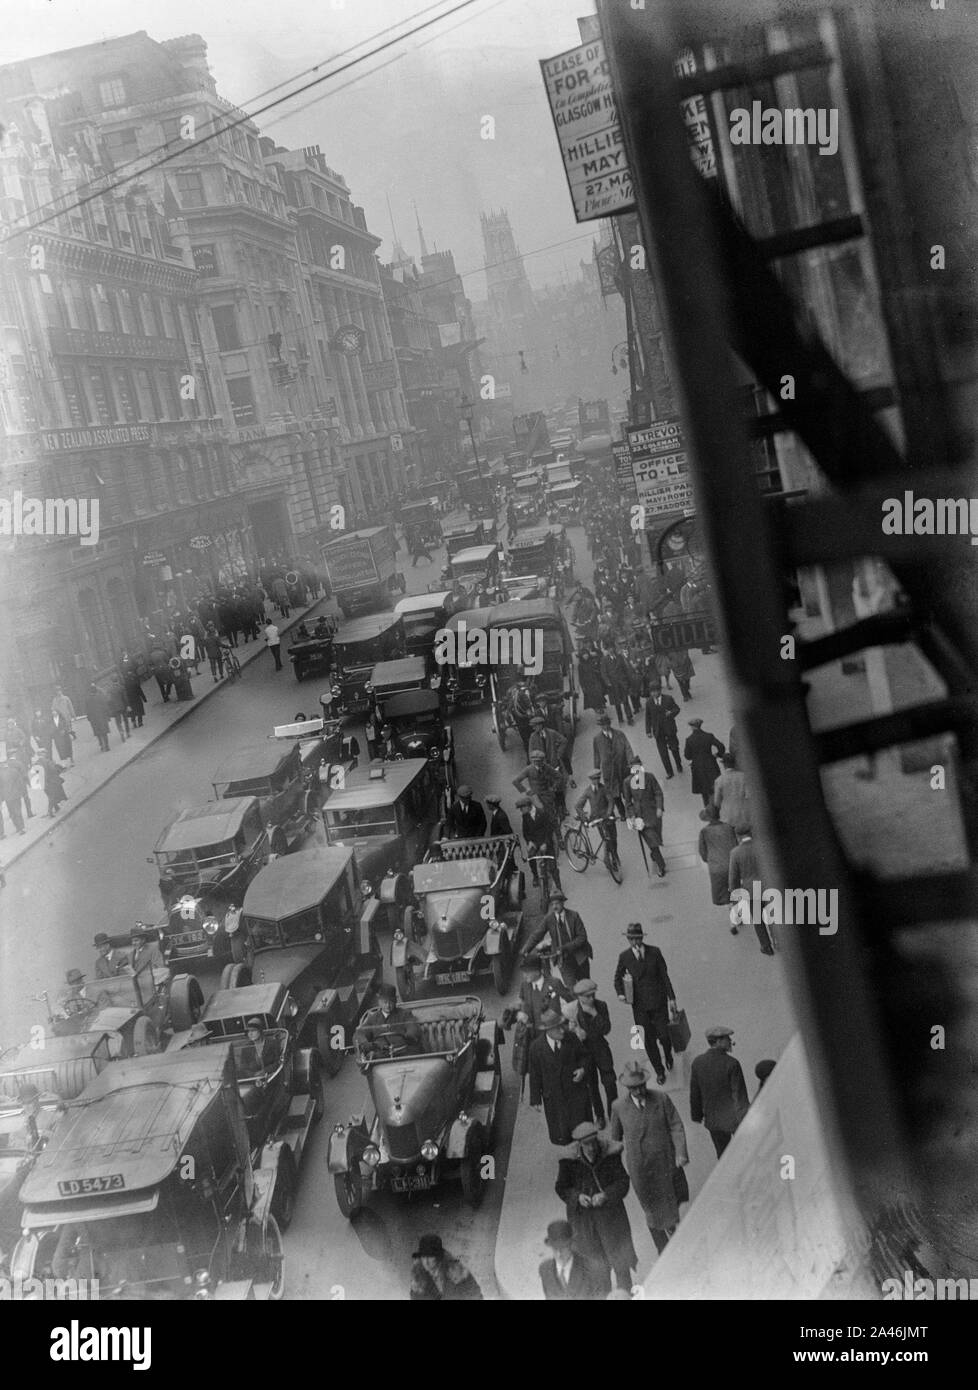 4th May 1926. Fleet Street, London, England. The streets of London busy with pedestrians and motor vehicles, as the general Strike begins to take hold. Soon, the streets would see the British Army in tanks and armoured cars, in an attempt to keep the peace and maintain basic services. Stock Photo